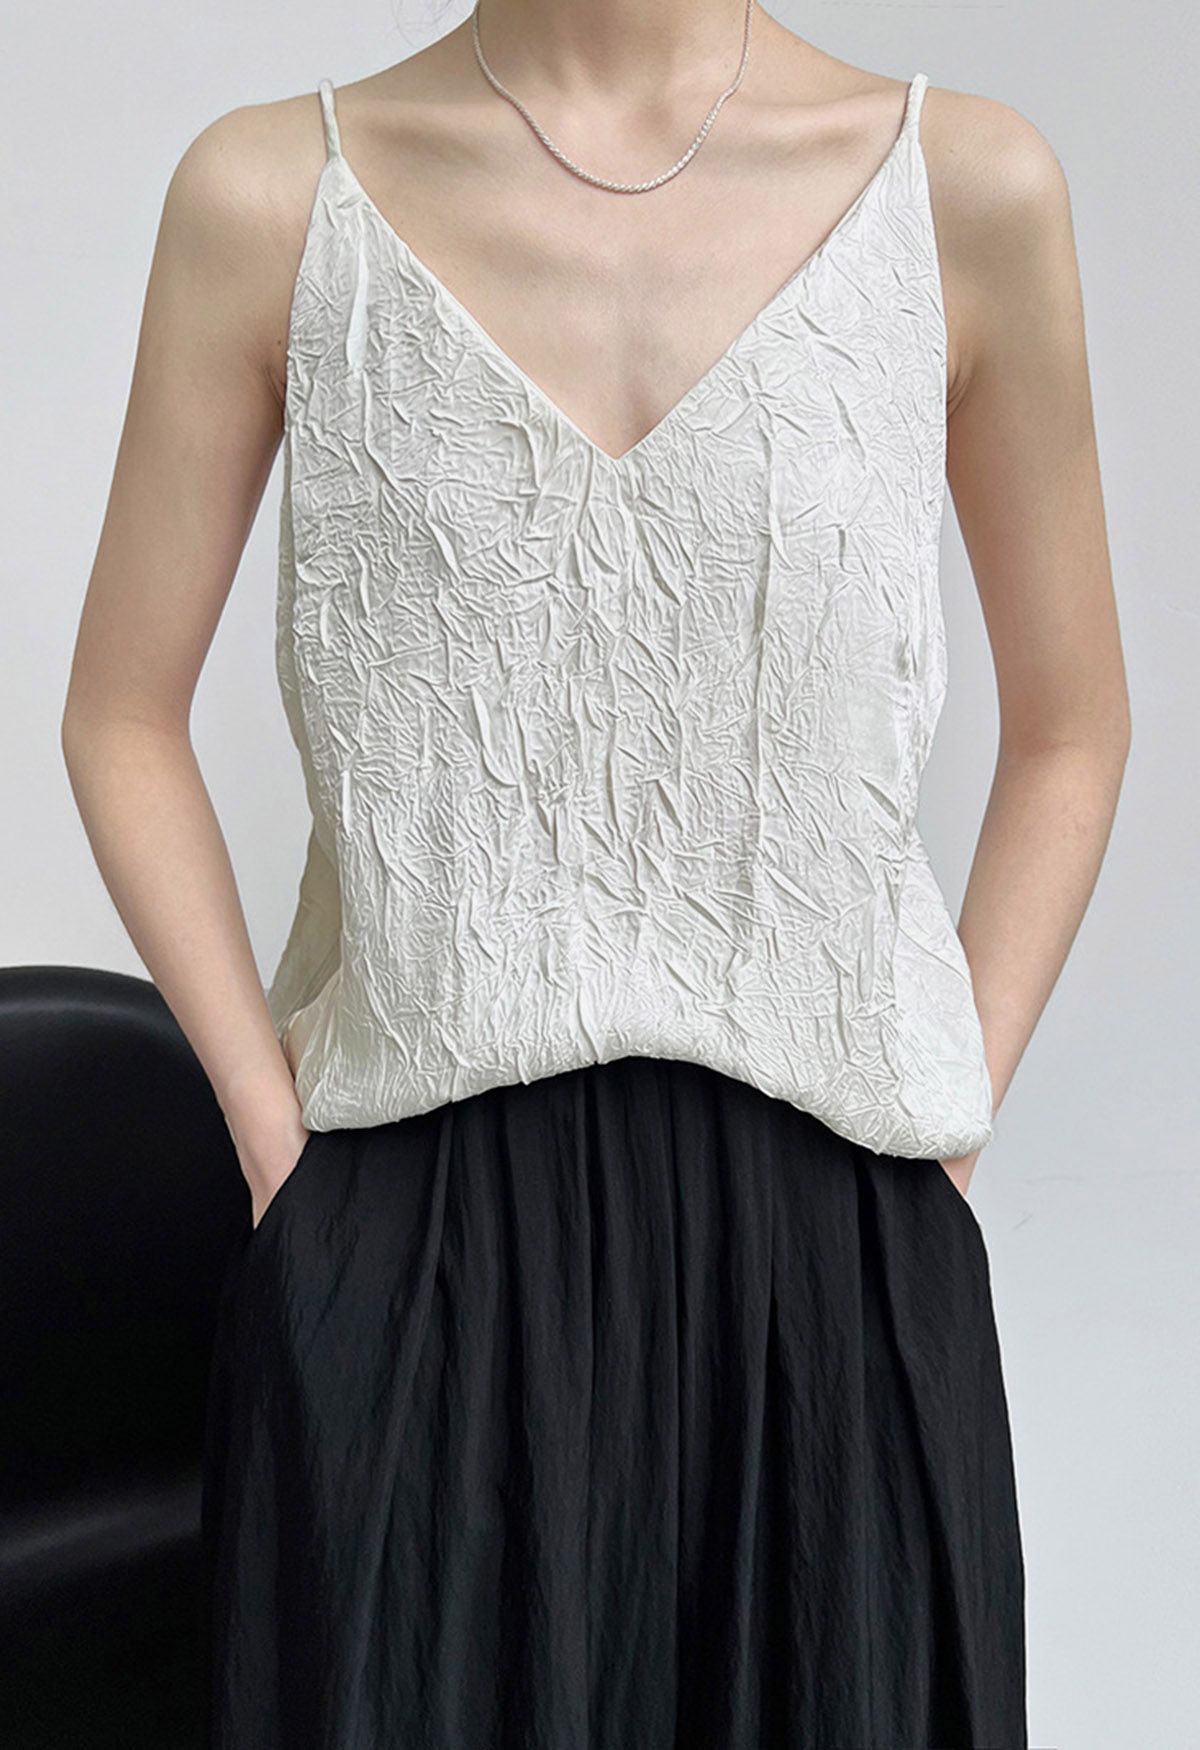 Embossed Texture V-Neck Cami Top in White - Retro, Indie and Unique Fashion